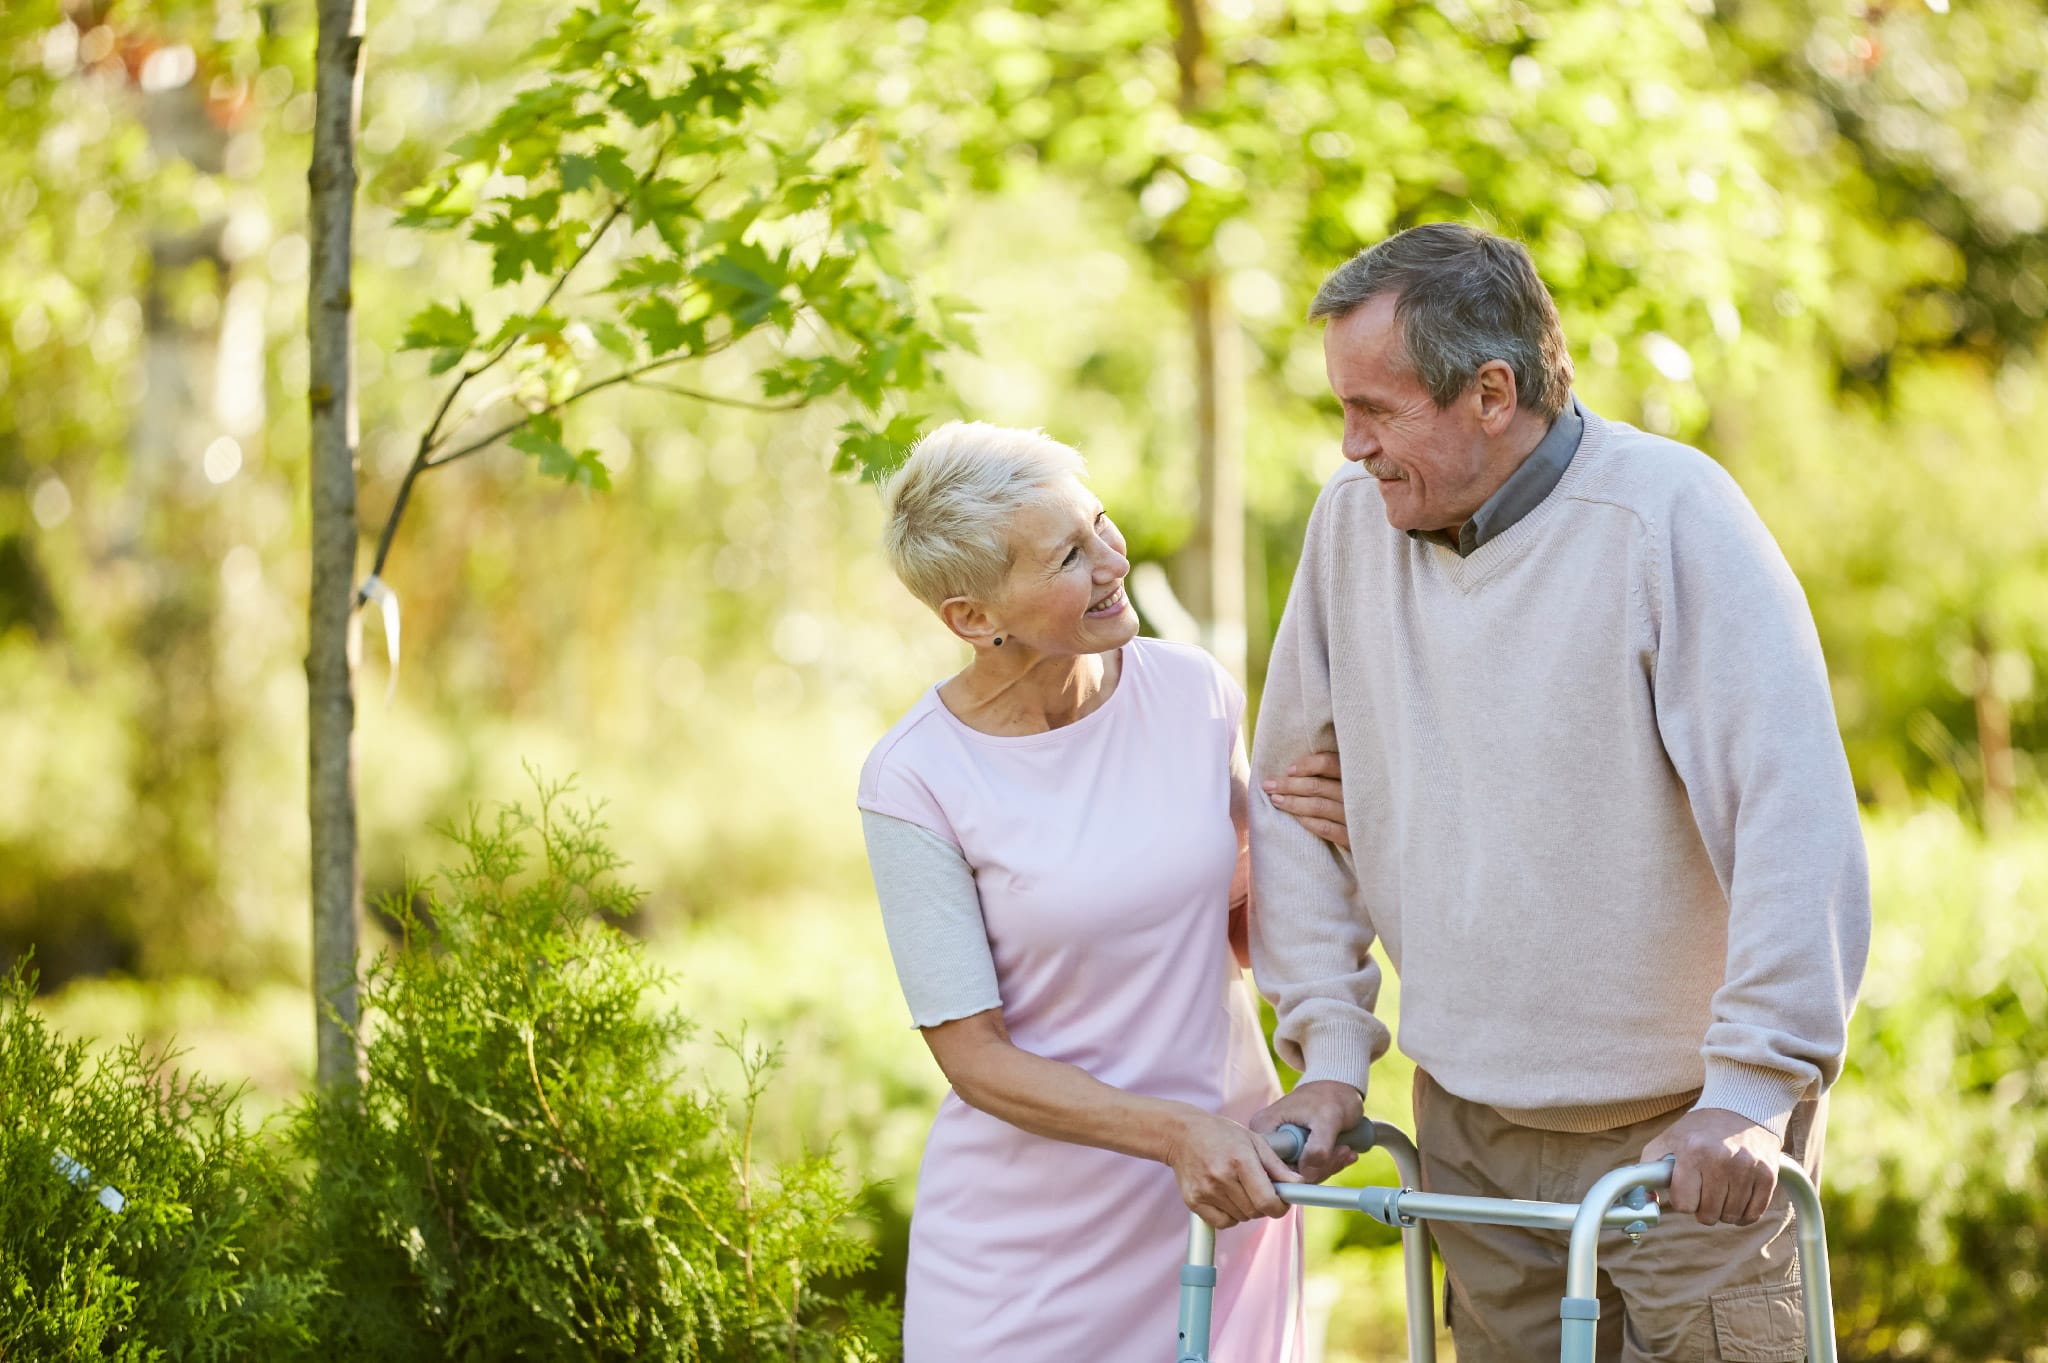 A Checklist for Finding the Best Transitional Care for Your Loved One